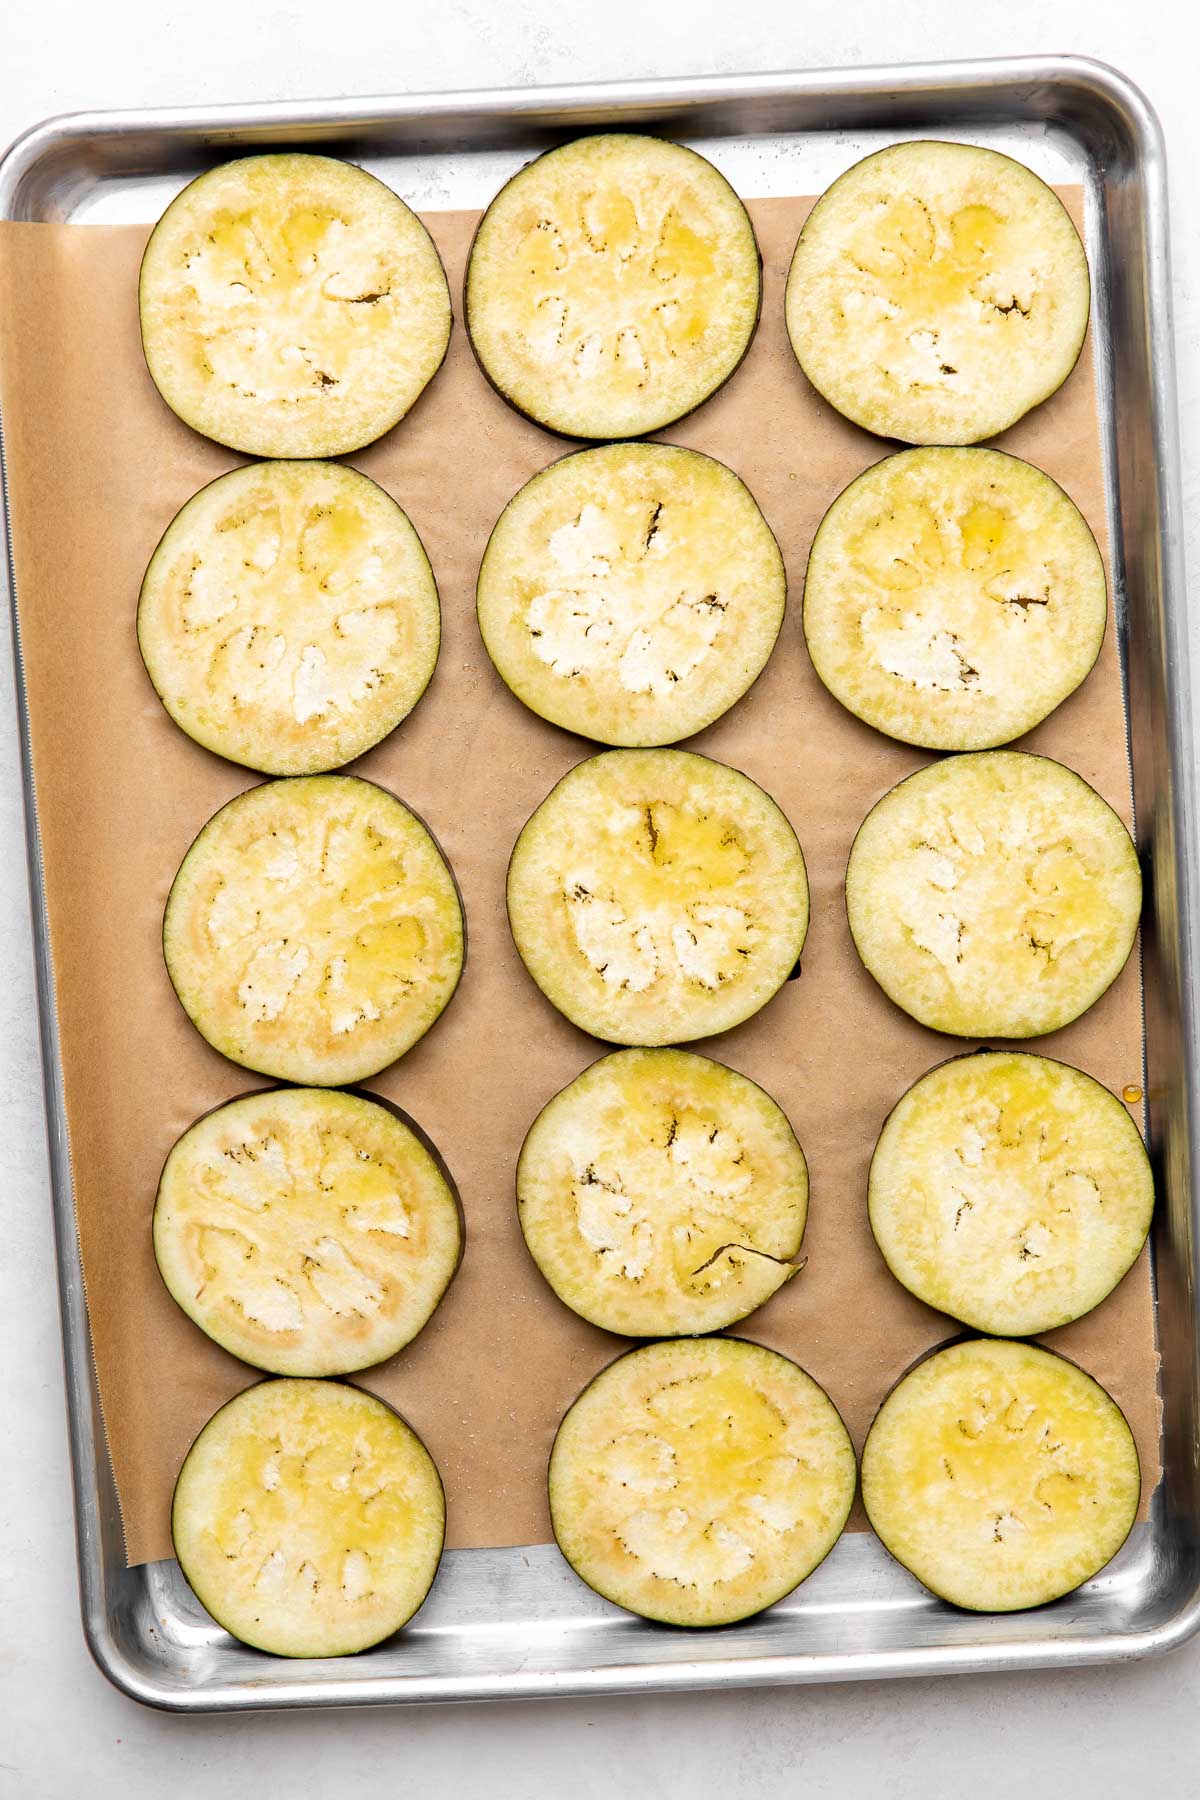 Eggplant rounds arranged on a parchment lined baking sheet sits atop a creamy white textured surface.